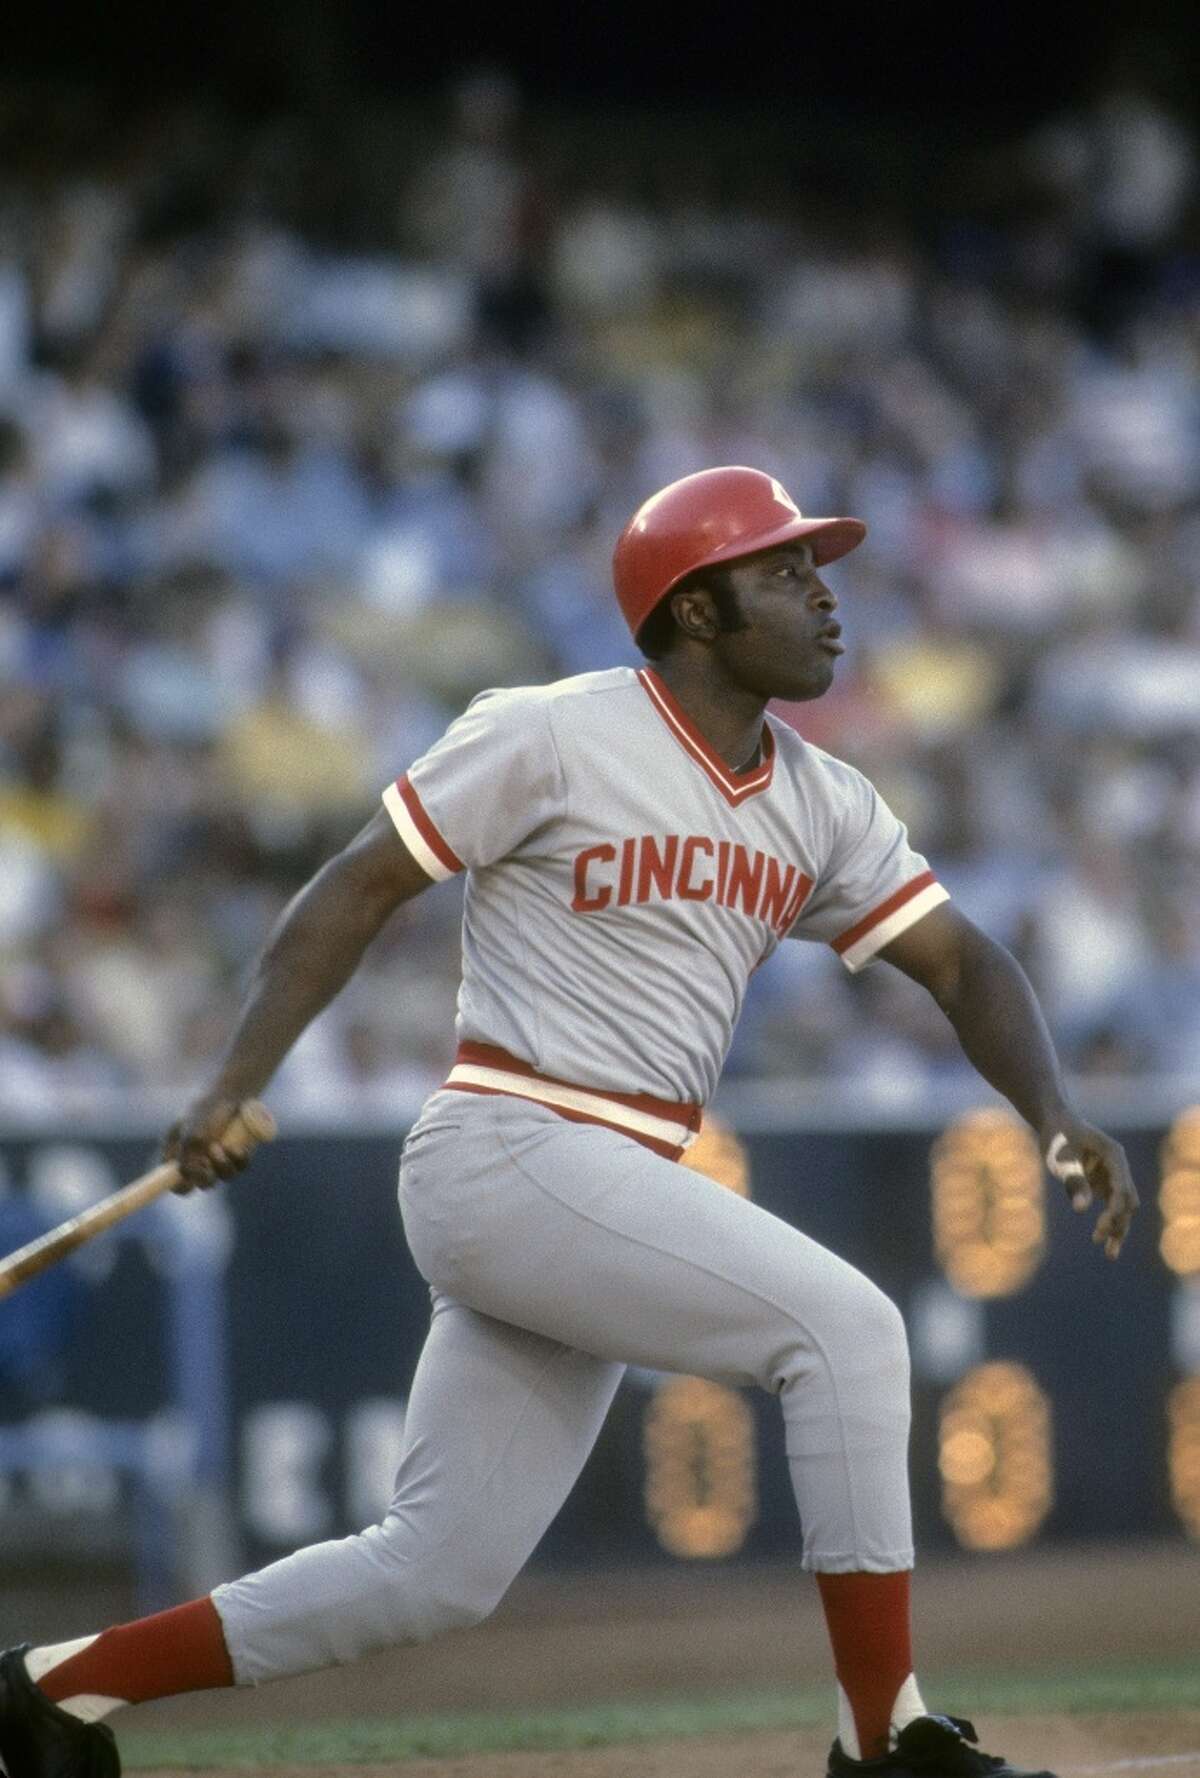 MOST LOPSIDED TRADES IN BASEBALL HISTORY 3. 2B Joe Morgan (to Cincinnati Reds from Houston Astros) with OF Cesar Geronimo, IF Denis Menke, RHP Jack Billingham and OF Ed Armbrister for 1B Lee May, 2B Tommy Helms and UT Jimmy Stewart Nov. 29, 1971 WAR gain: 67.6 (8 seasons from Morgan worth 57.8) Behold: the worst trade in Astros history. Morgan, 28 at the time, had twice been an All-Star over nine seasons in Houston but saw his slash line slip to .256/.351/.407 in 1971, while May was coming off a 39-homer, 98-RBI season with the Reds. May averaged 26 homers and 98 RBIs in three productive seasons with the Astros, but Morgan became baseball’s No. 1 offensive force in Cincinnati. He was an All-Star in each of his eight seasons with the Reds and won MVP awards in their championship years of 1975 and 1976. In his first six years as a Red, his lowest seasonal totals were a .288 batting average, a .406 on-base percentage, a .435 slugging percentage, 107 runs, 16 homers, 67 RBIs, 111 walks and 49 stolen bases. (His highs: .327, .466, .576, 122, 27, 111, 132 and 67.) And he won five consecutive Gold Gloves from 1973-77.